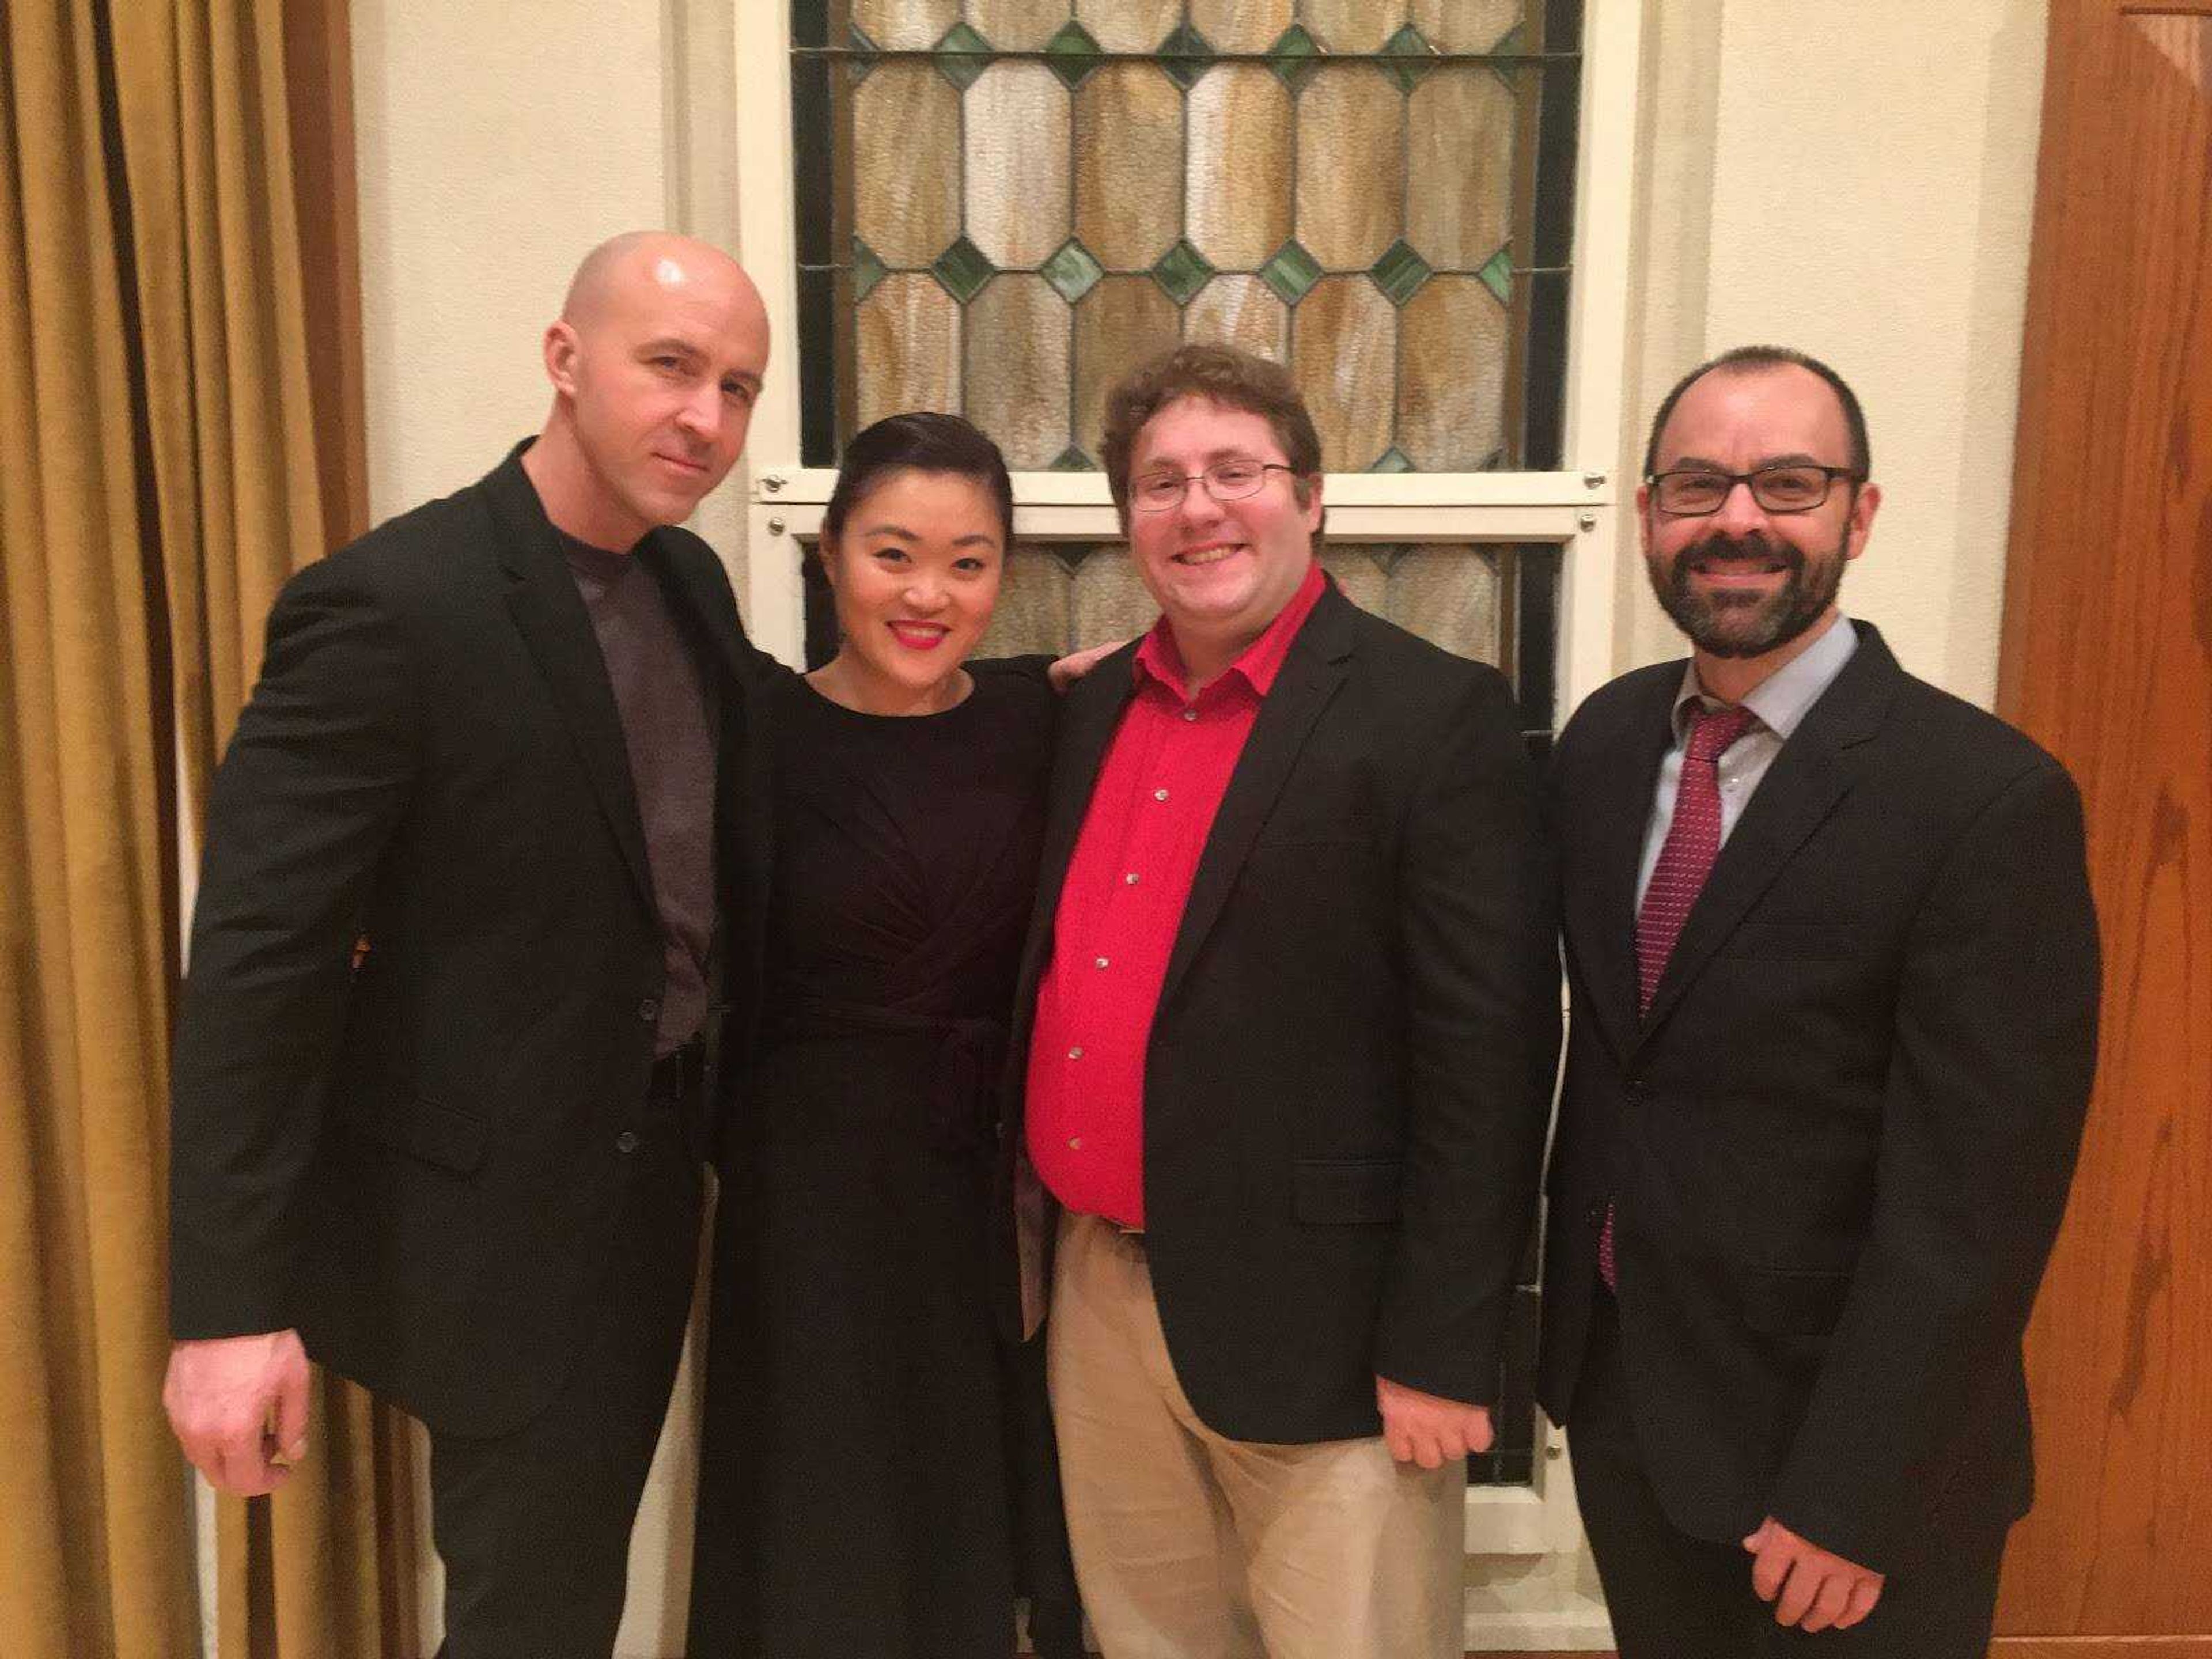 Performers Matt Yount, Sophia Han, Galen Dean Peiskee Jr. and Brent Williams smile after their performance on Feb. 29 at Shuck Recital Hall in Cape Girardeau, Missouri.